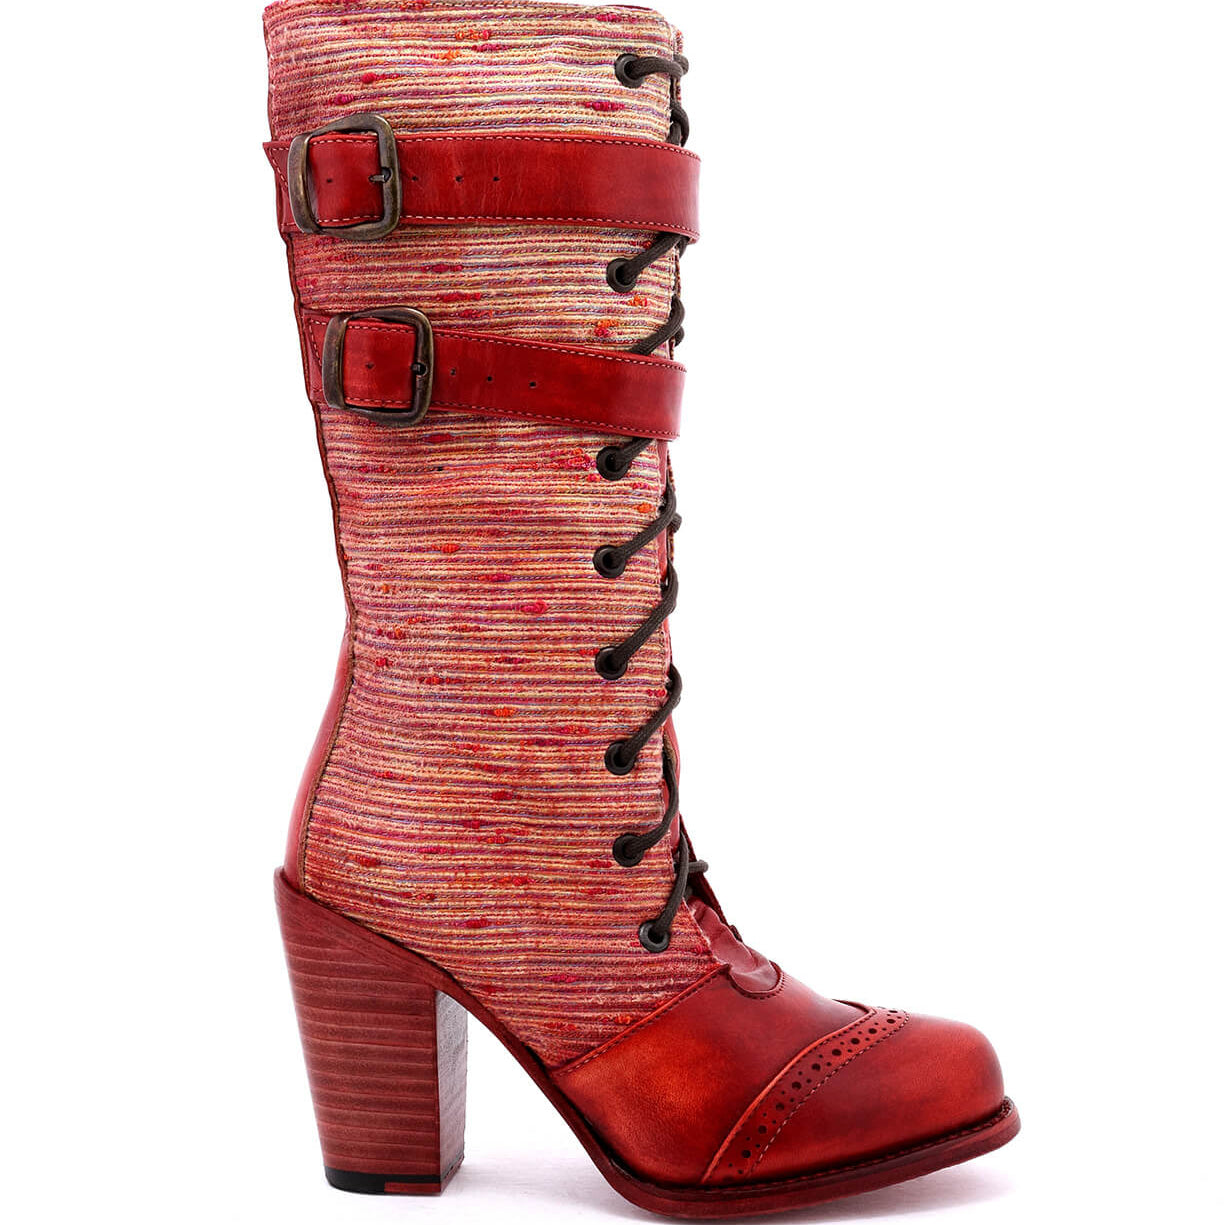 An Arabella by Oak Tree Farms, a whimsical print leather boot with a buckle that portrays a Victorian lady.